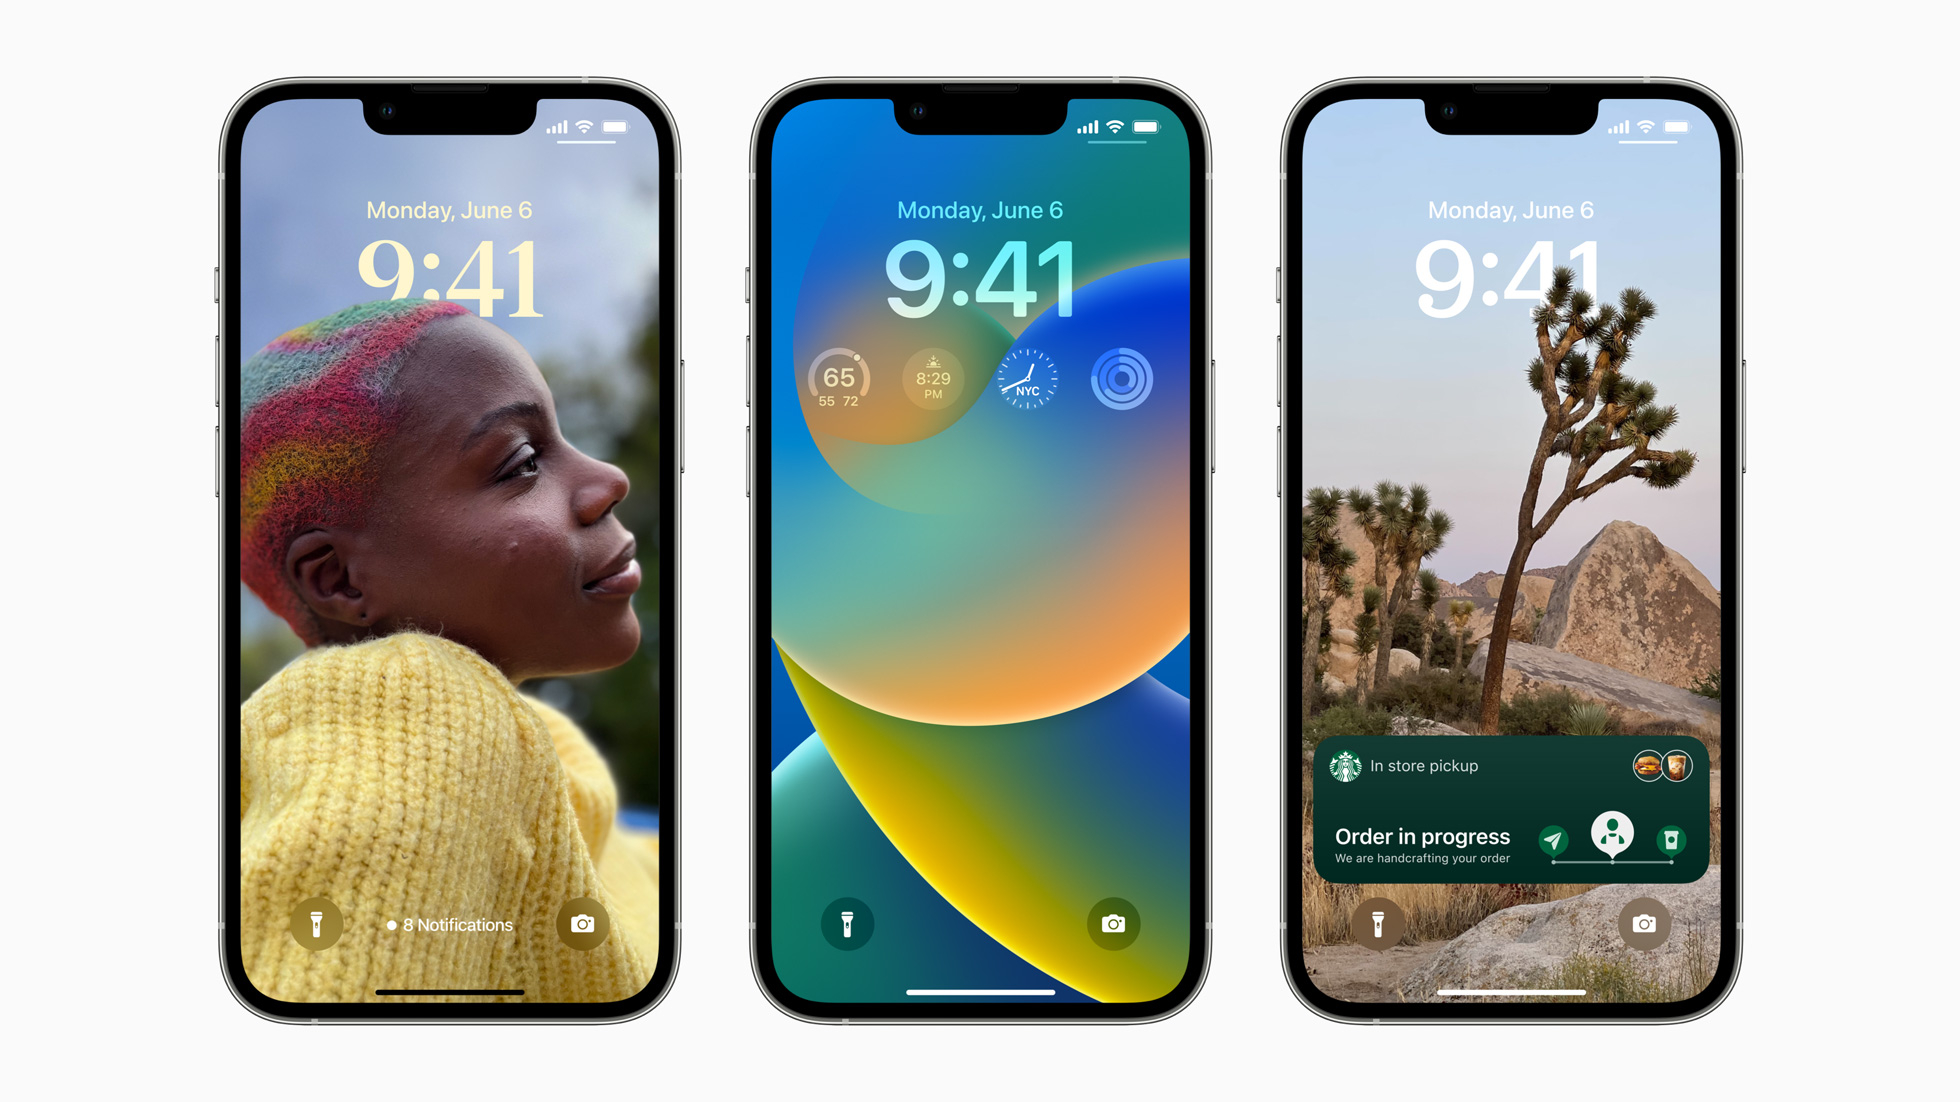 iOS 16 delivers the biggest update ever to the Lock Screen with new features that make it more beautiful, personal, and helpful.